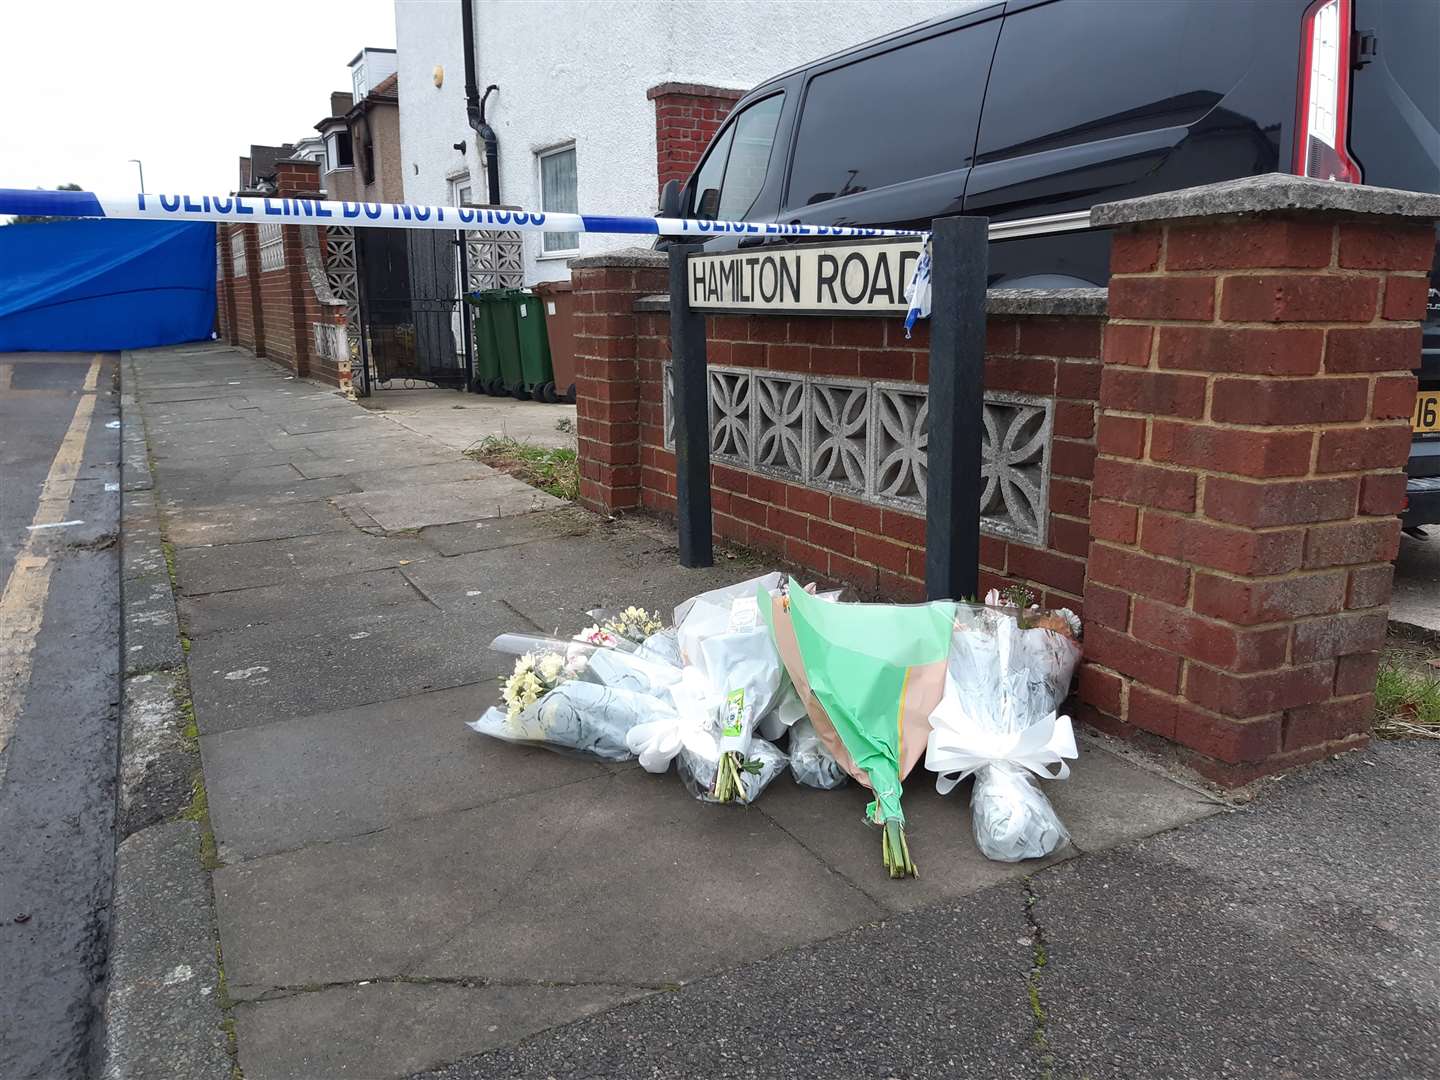 A growing number of flowers have been left in Hamilton Road, Bexleyheath